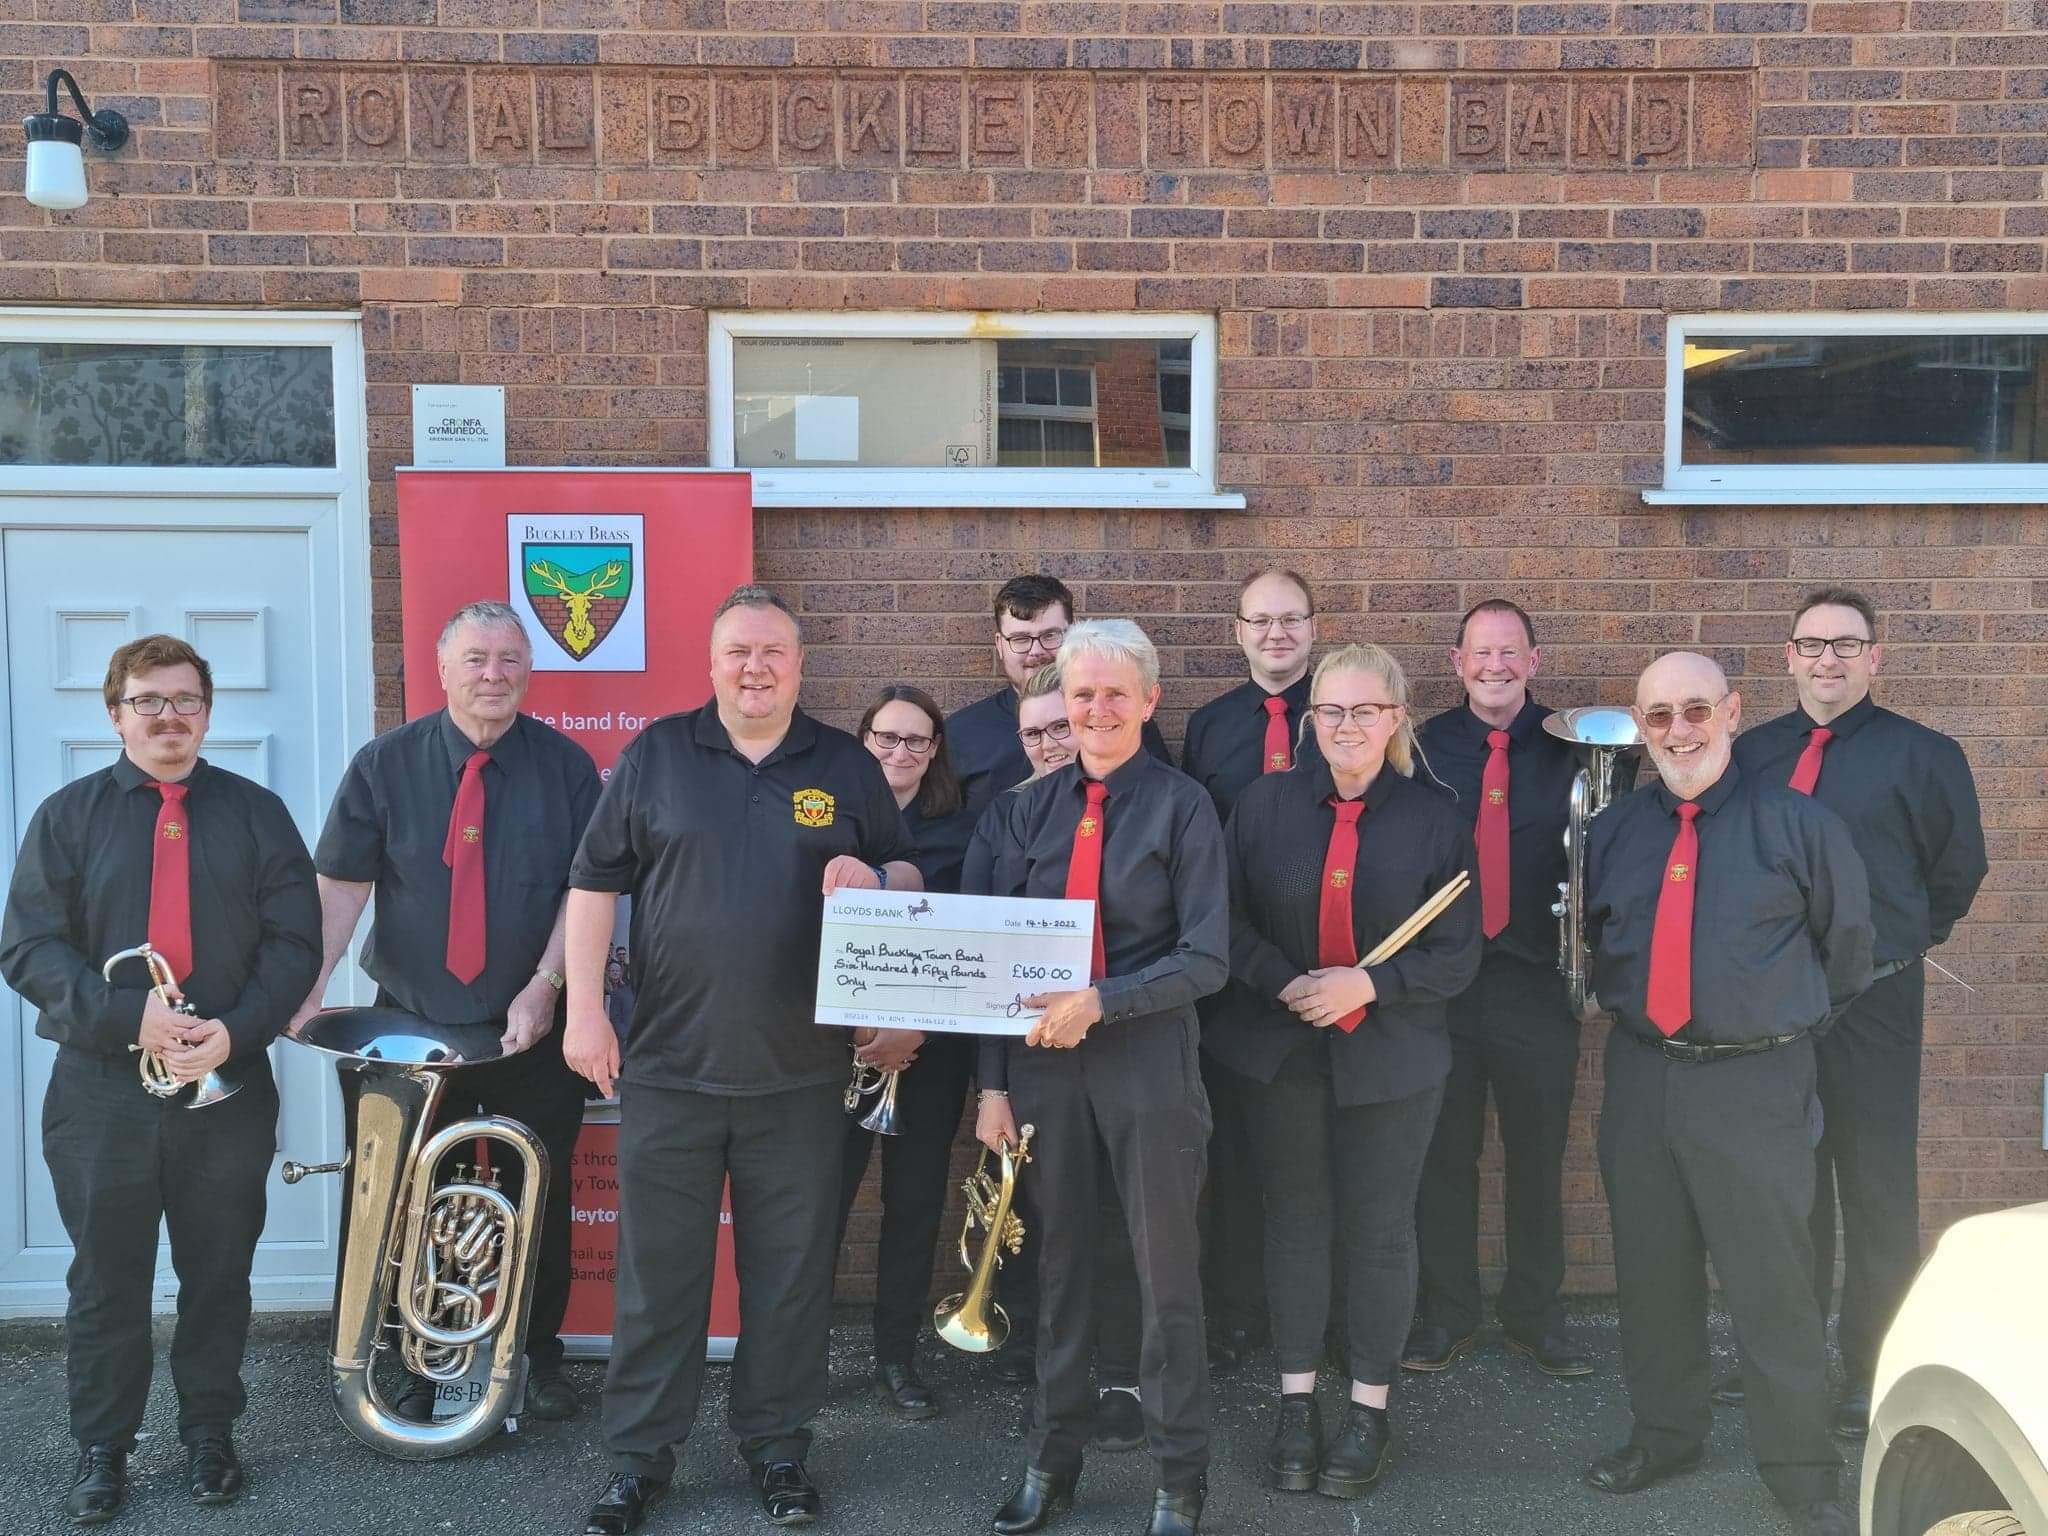 Julie Le Dain presents a cheque to Stephen Griffiths, chairman of Royal Buckley Town Band, with some of the players from Buckley Brass and conductor Steve Pugh-Jones.